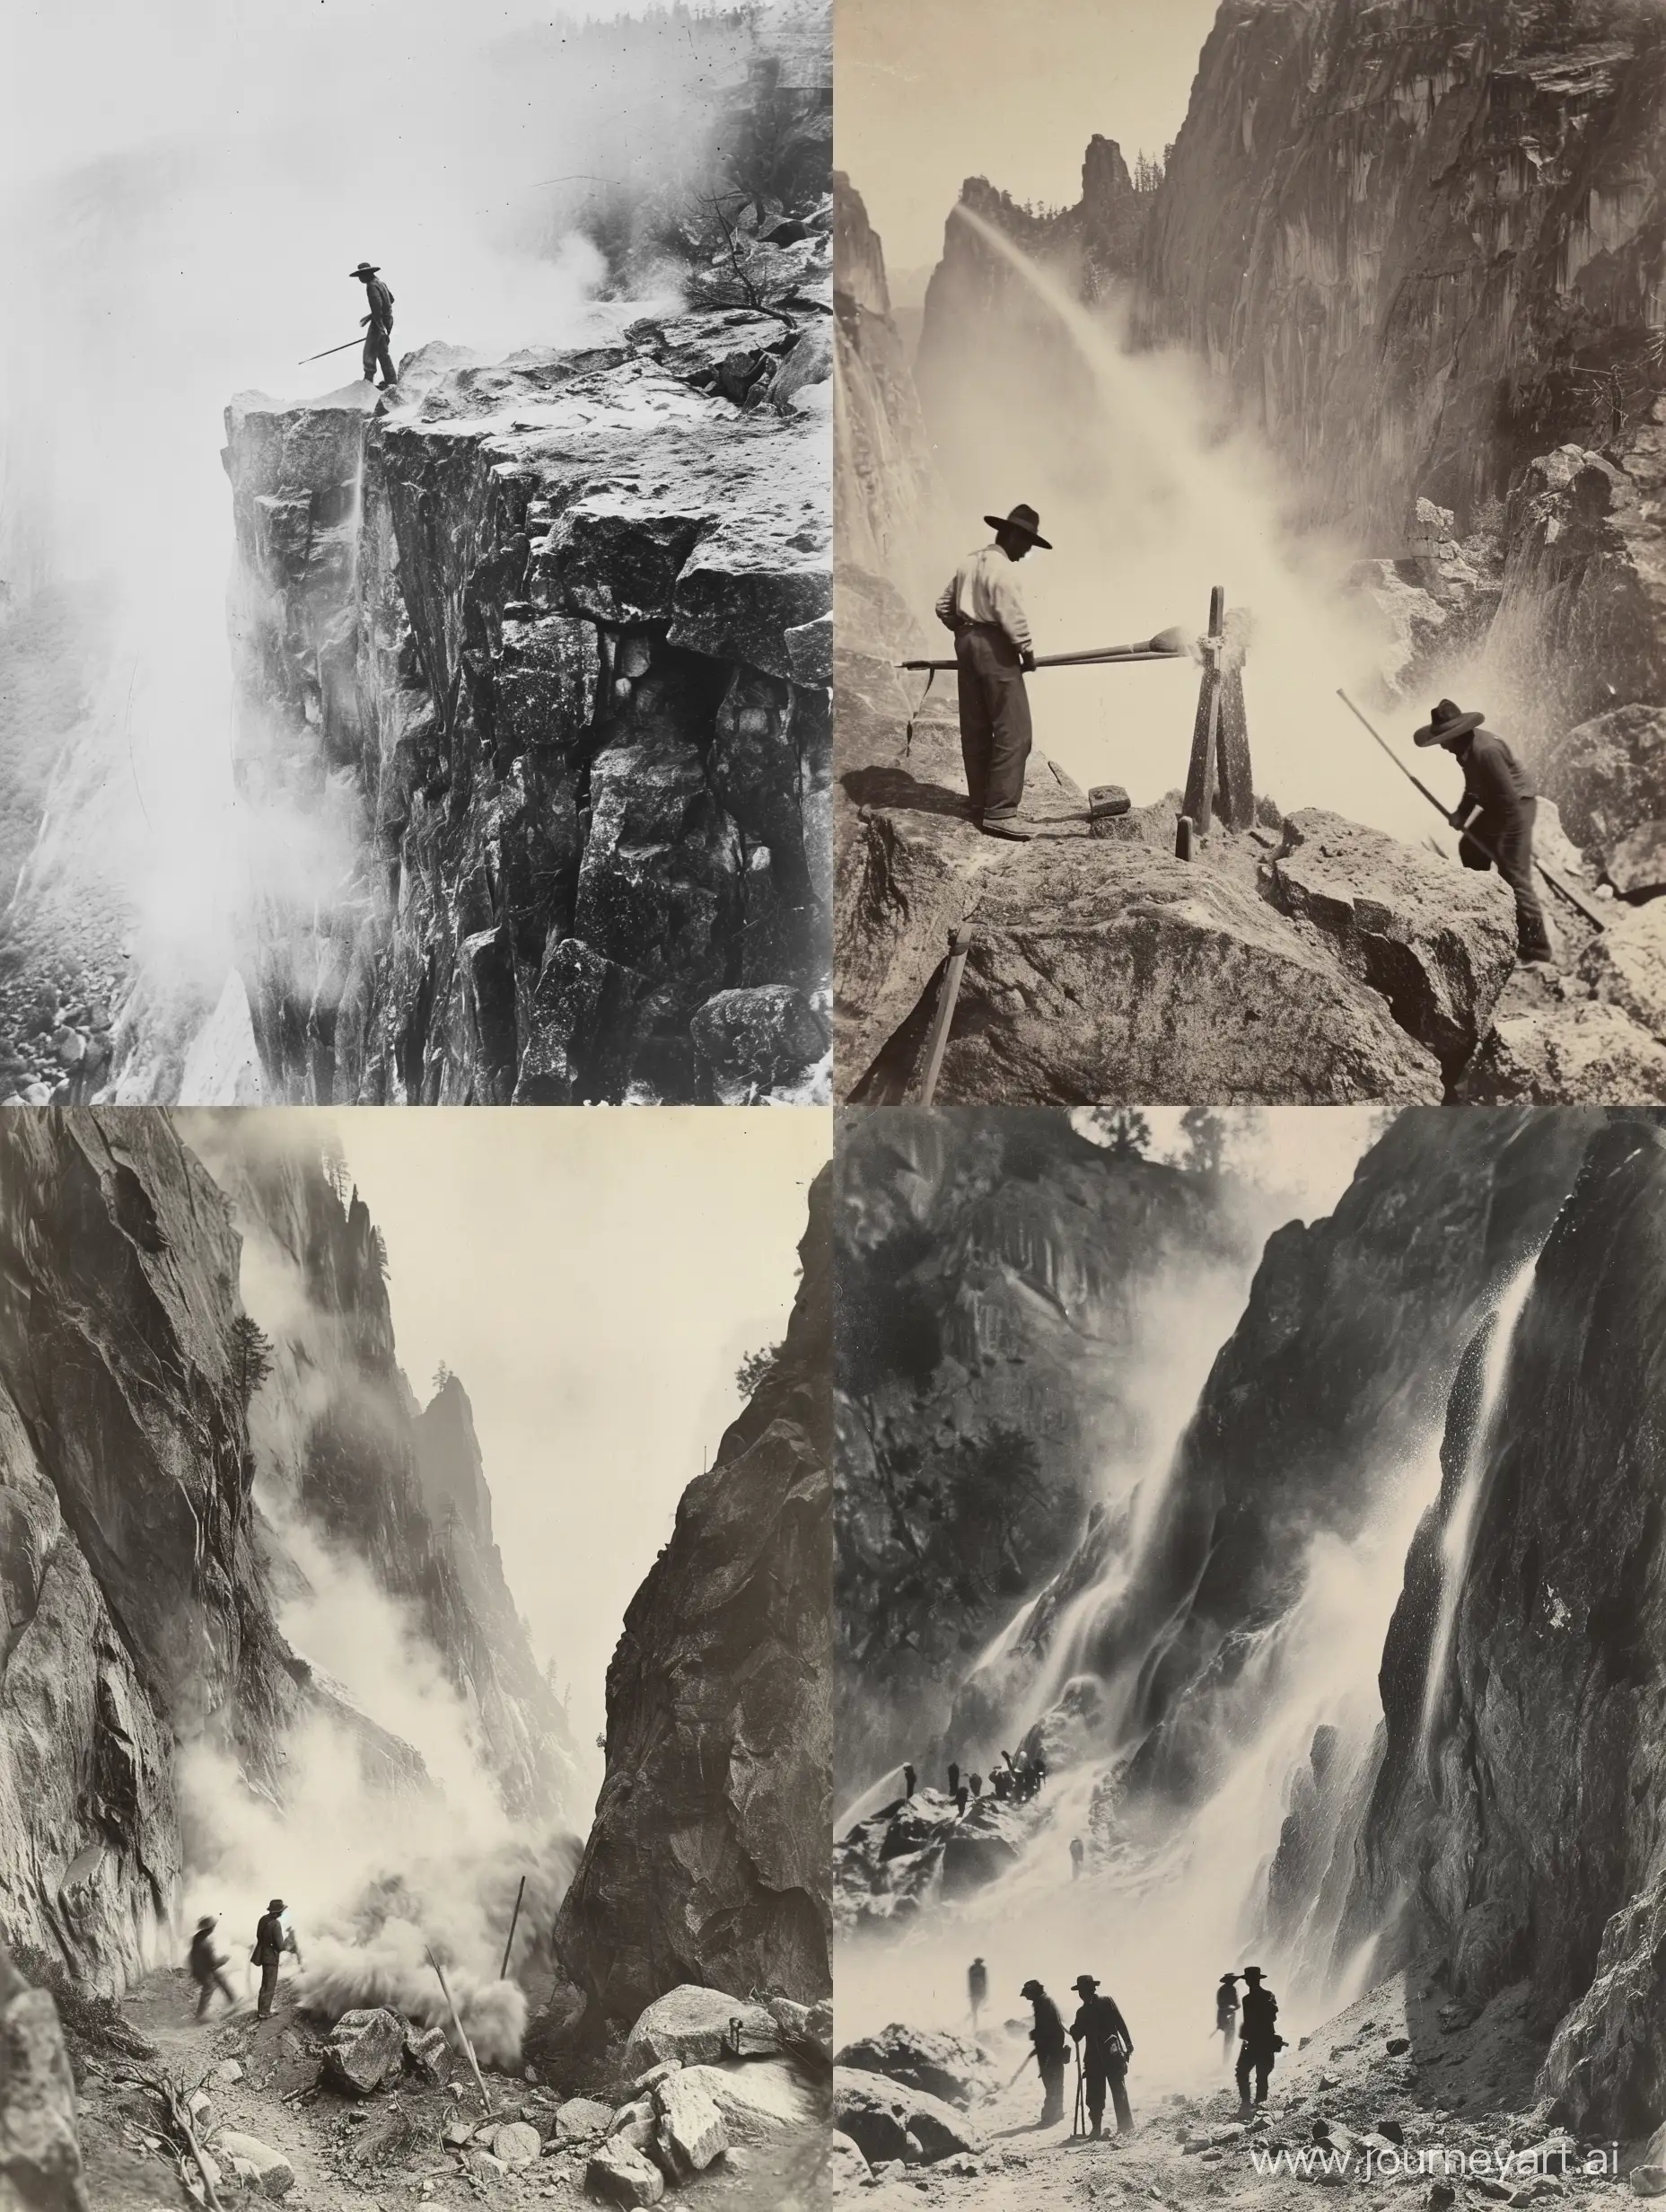 Historical black and white photographs depicting a Chinese worker's blasting powder at Yosemite in the late 1800s, without figure.